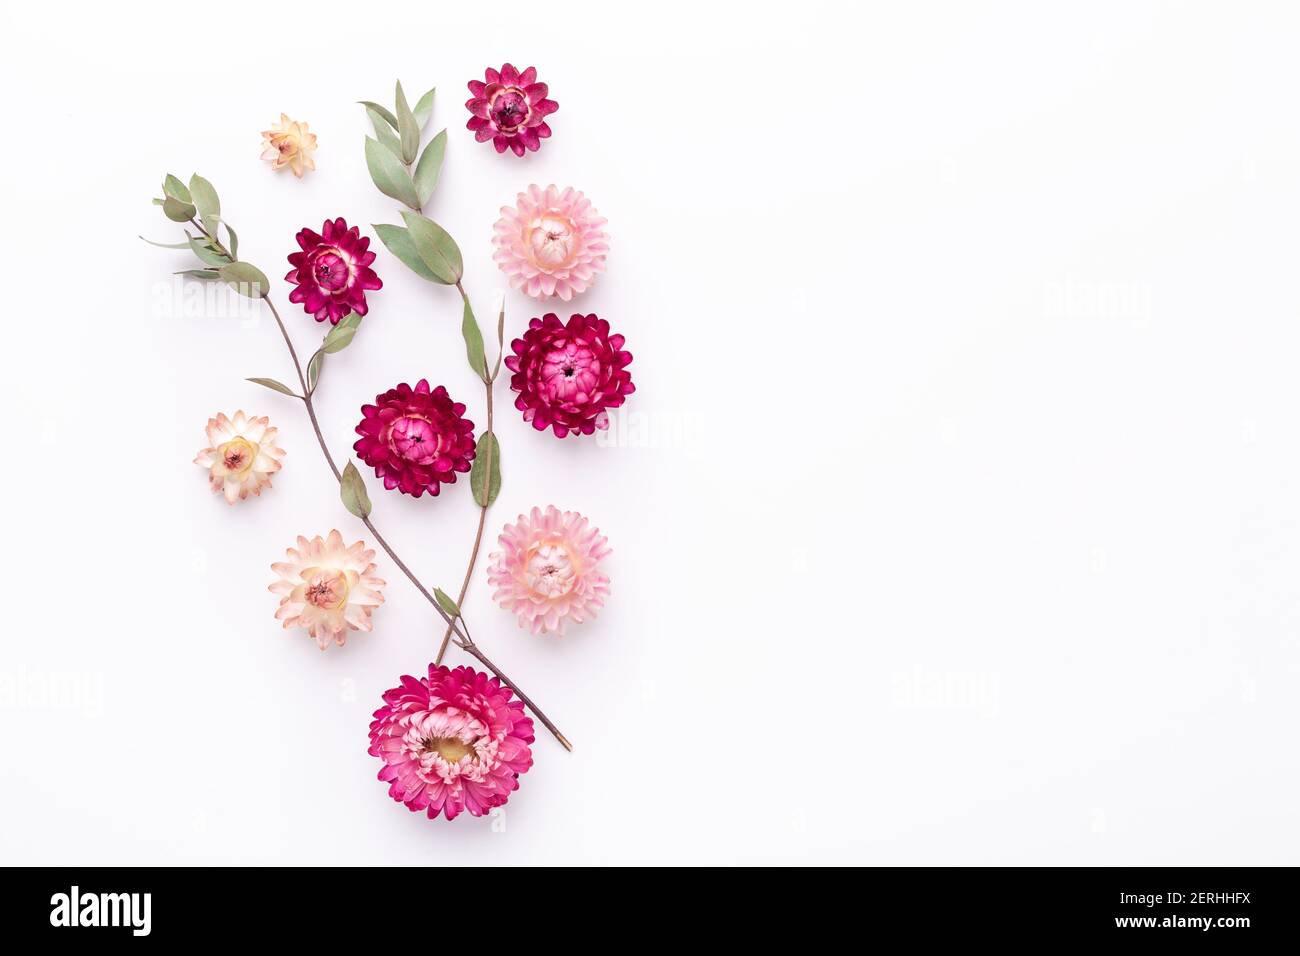 Flower composition. Eucalyptus branches and dry flowers on white background. Flat lay. Top view. Copy space - Image Stock Photo